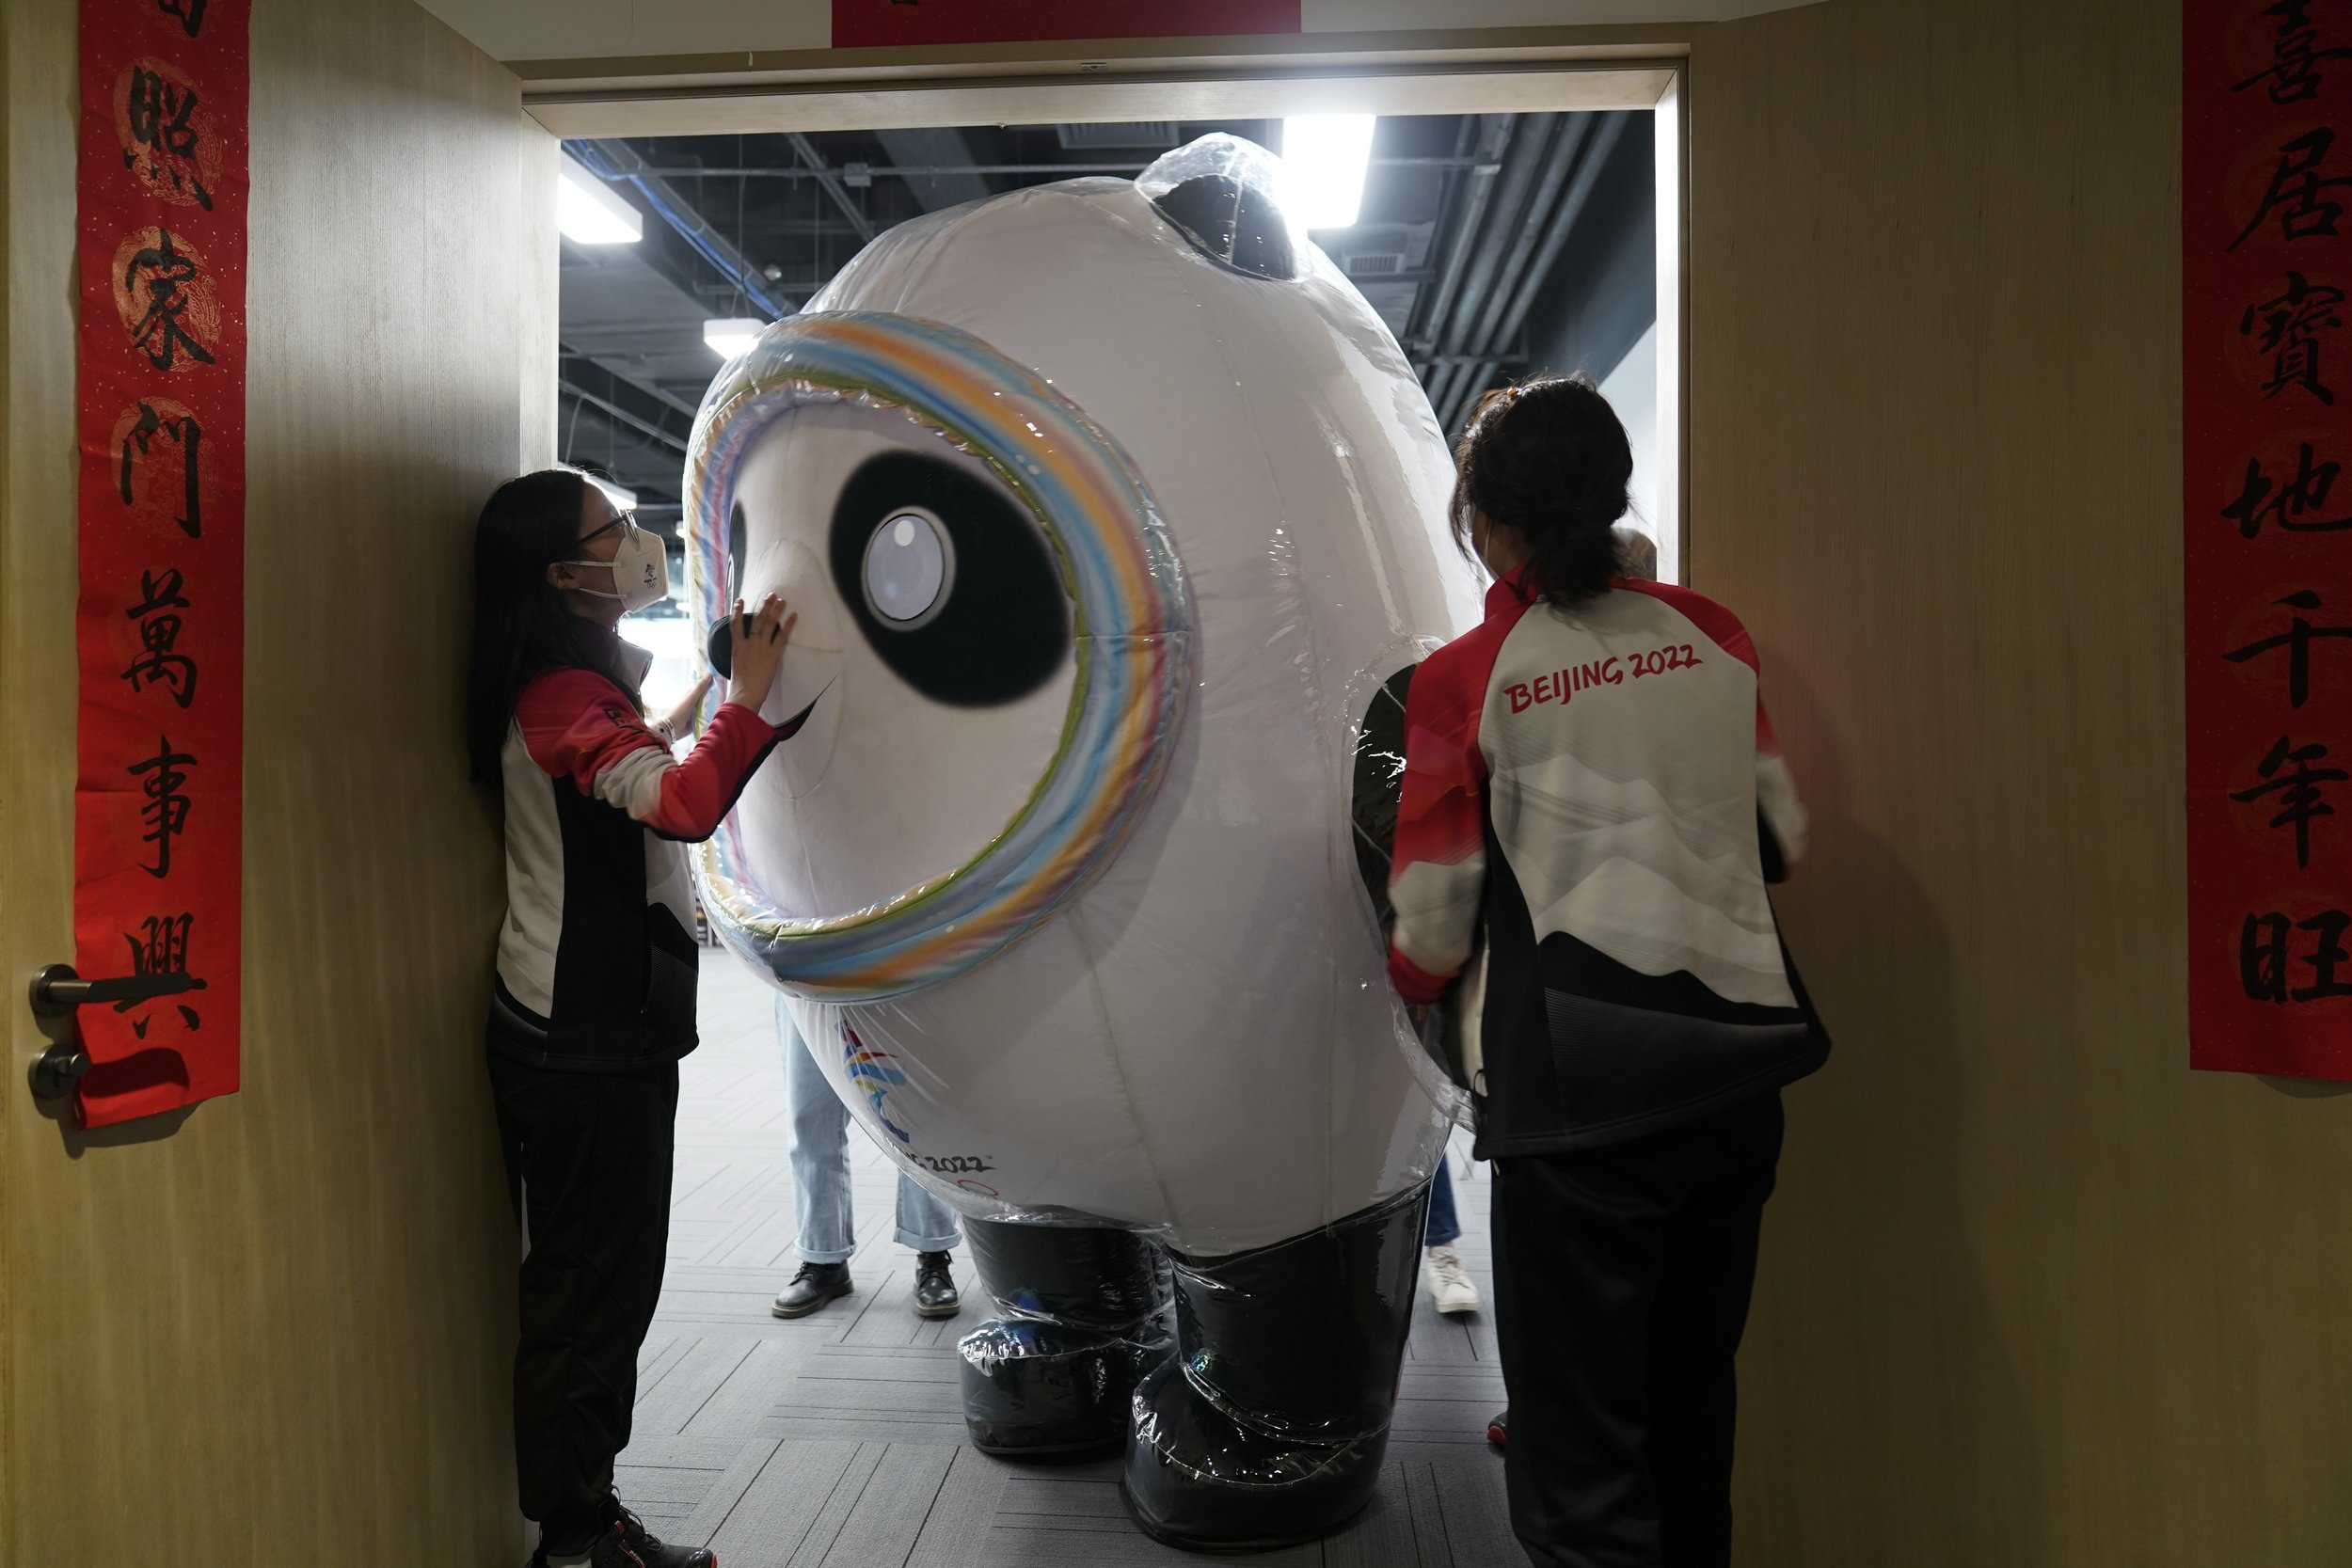  Bing Dwen Dwen, the mascot of the Beijing 2022, turns sideways to exit through the doors after visiting the Xinhua news agency's office at the 2022 Winter Olympics, Tuesday, Feb. 8, 2022, in Beijing. (AP Photo/Jae C. Hong) 